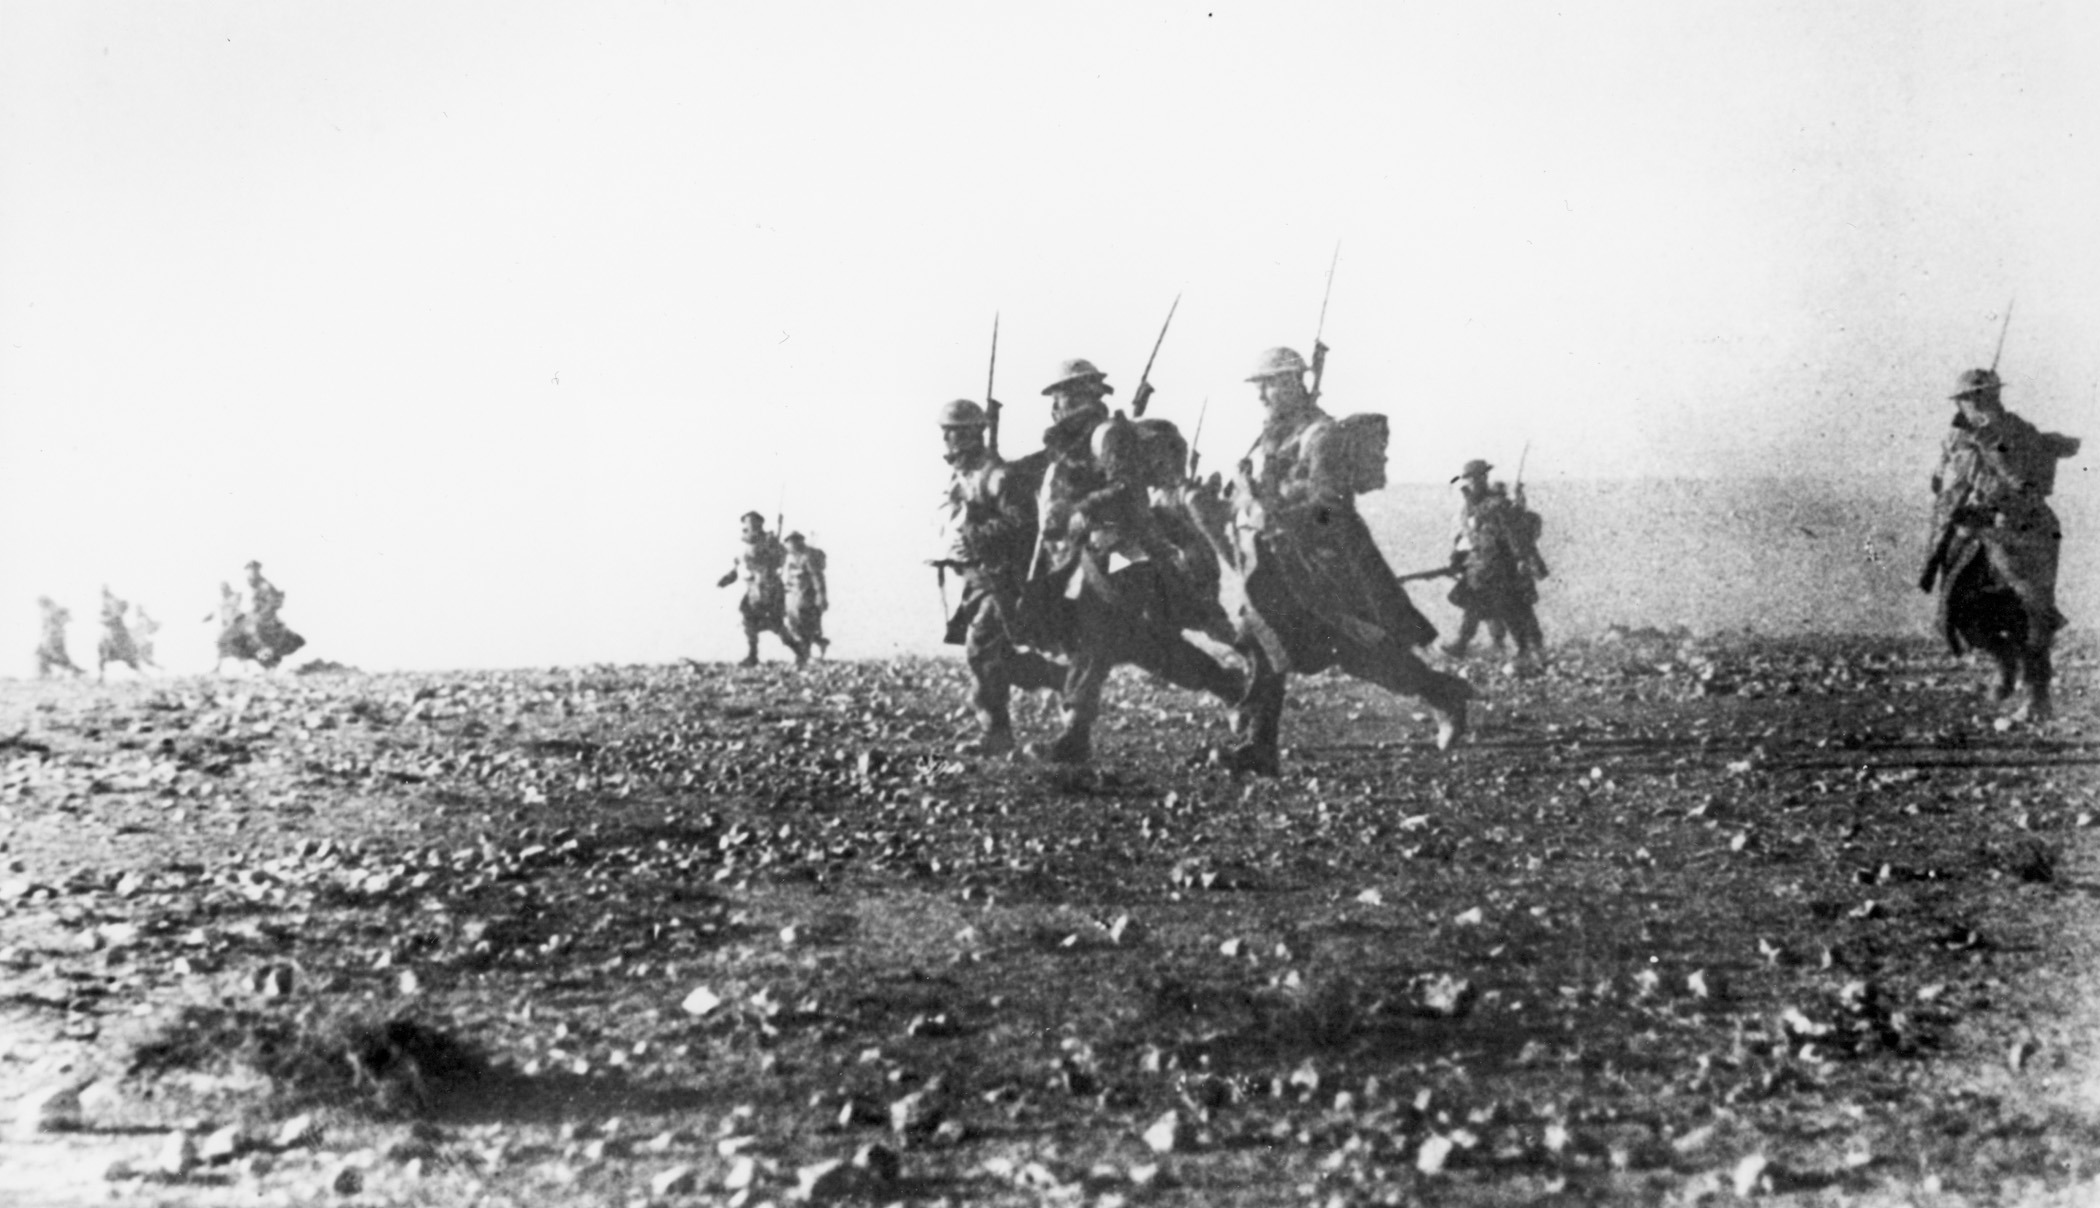 During their advance against Italian positions at Bardia, heavily equipped Australian soldiers advance rapidly across open ground. The Italians lost some 30,000 prisoners in a matter of hours.